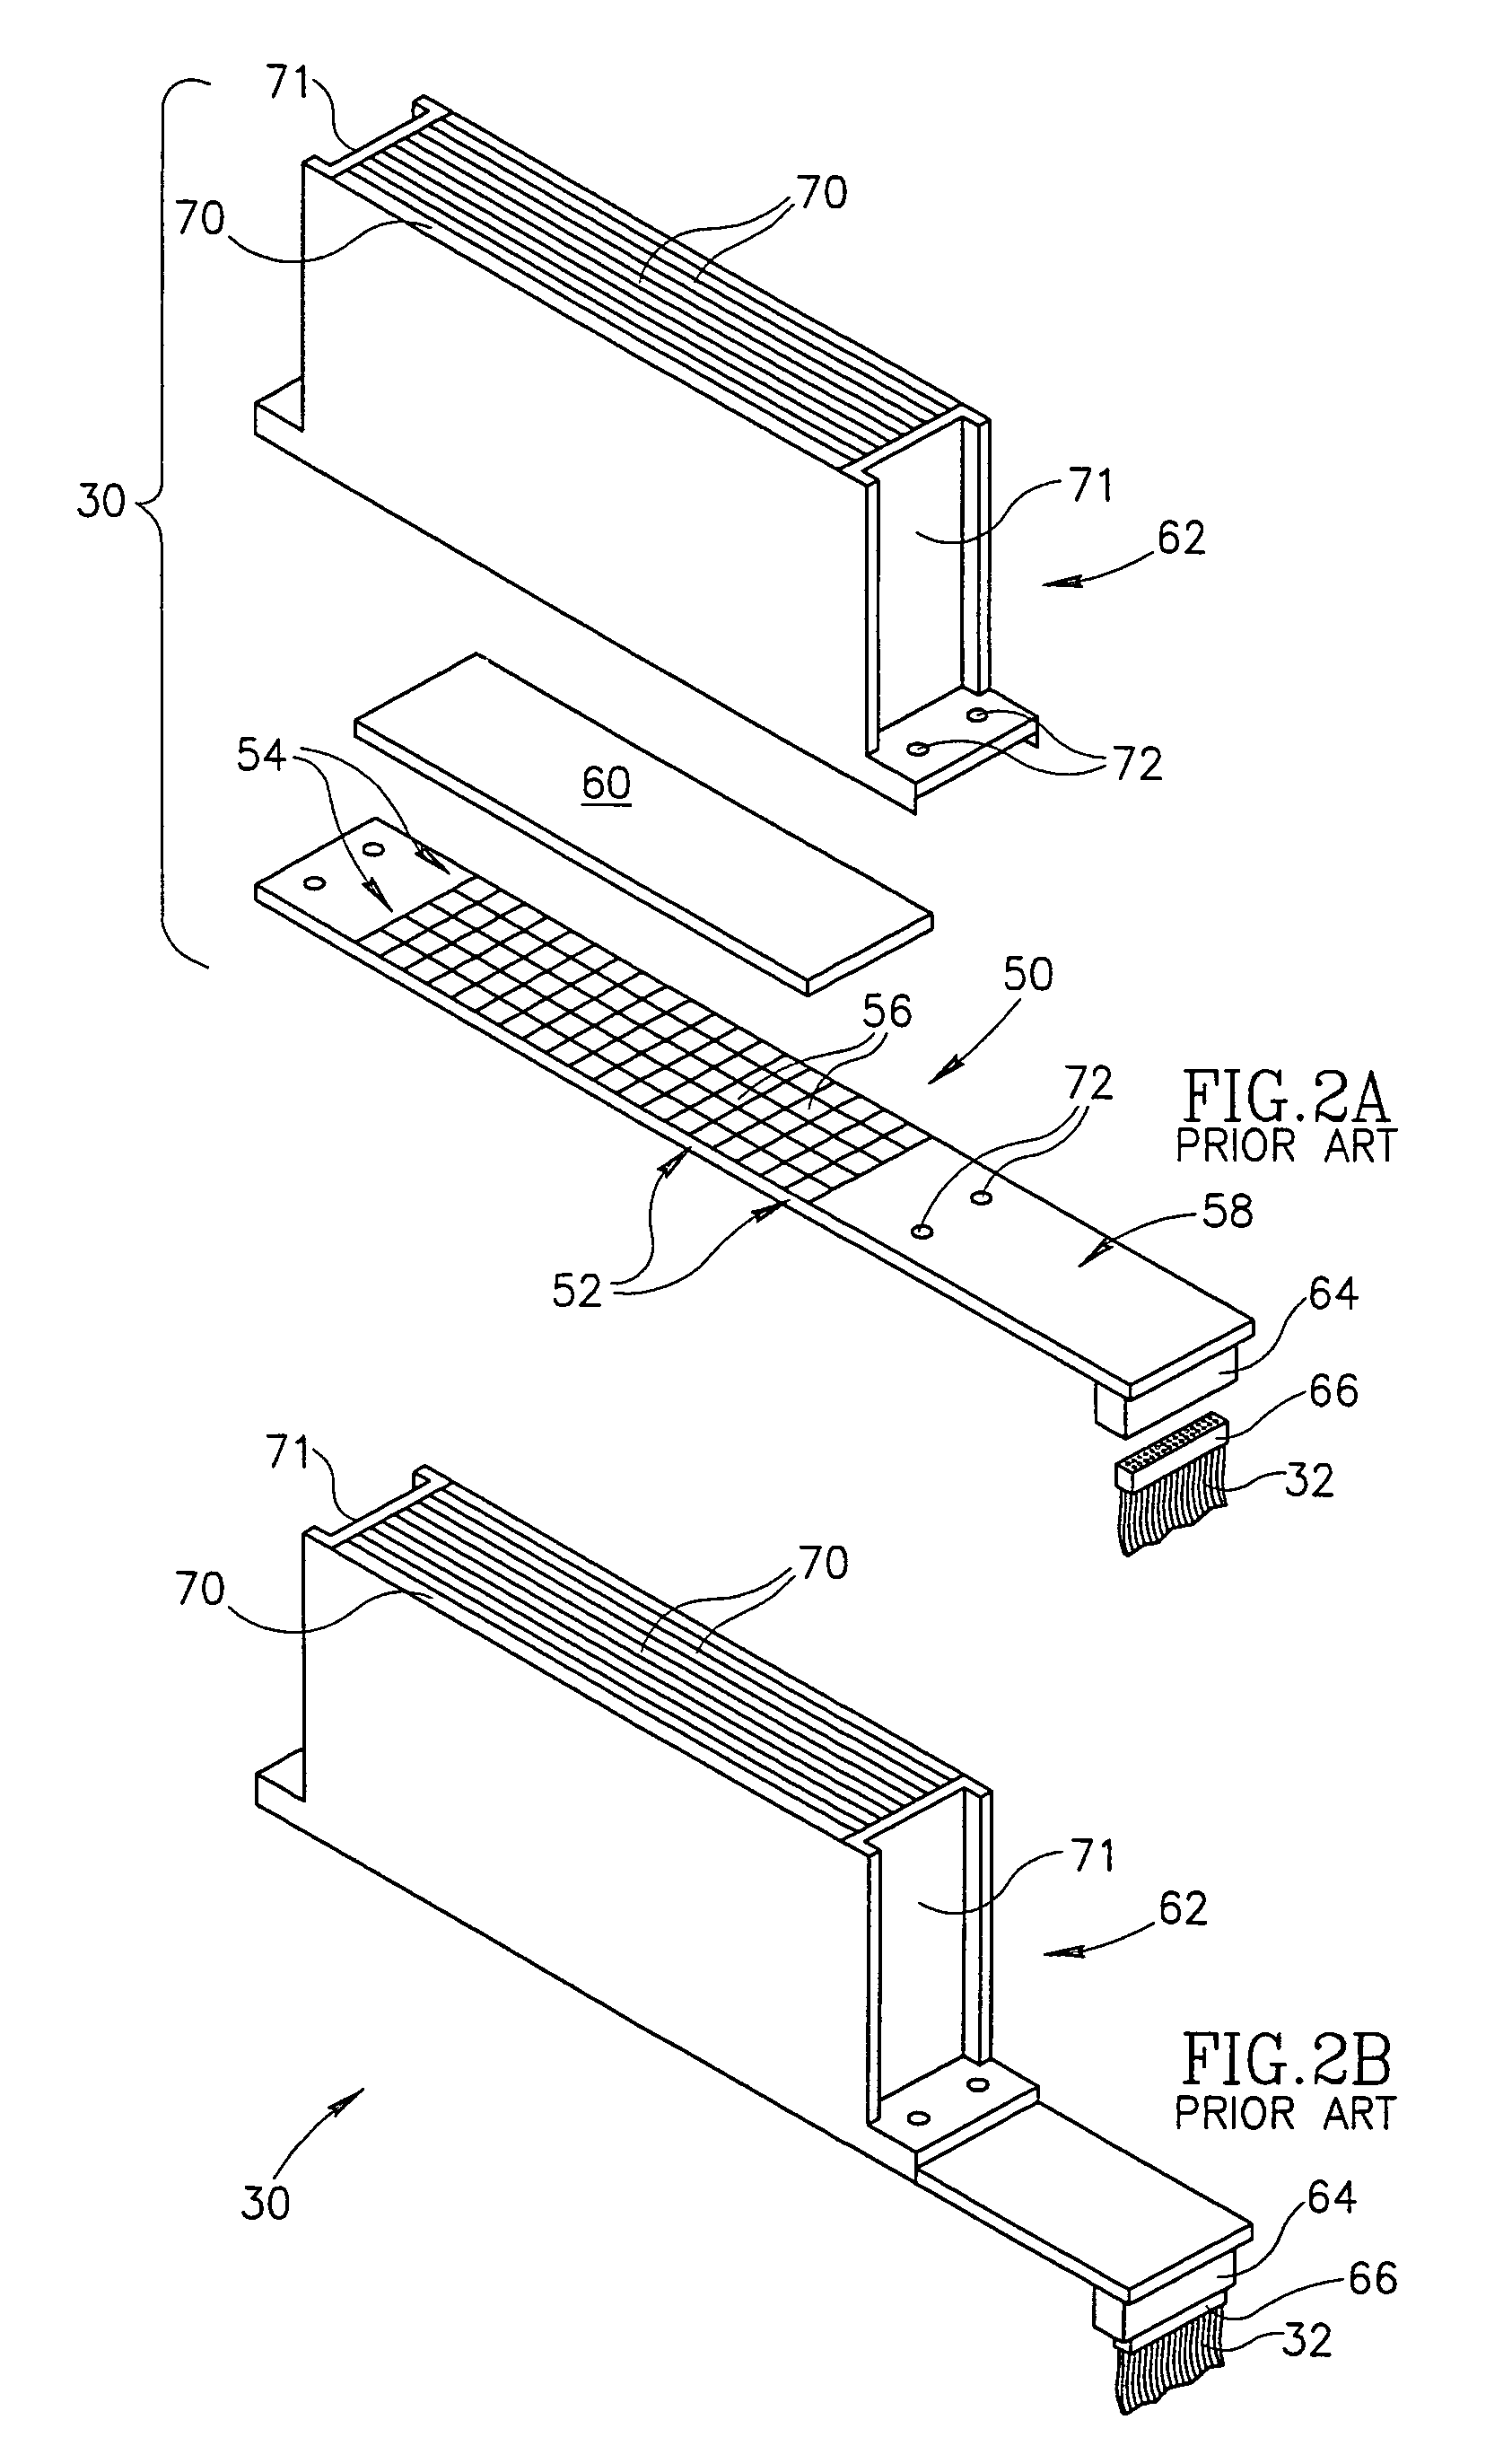 CT detector-module having radiation shielding for the processing circuitry